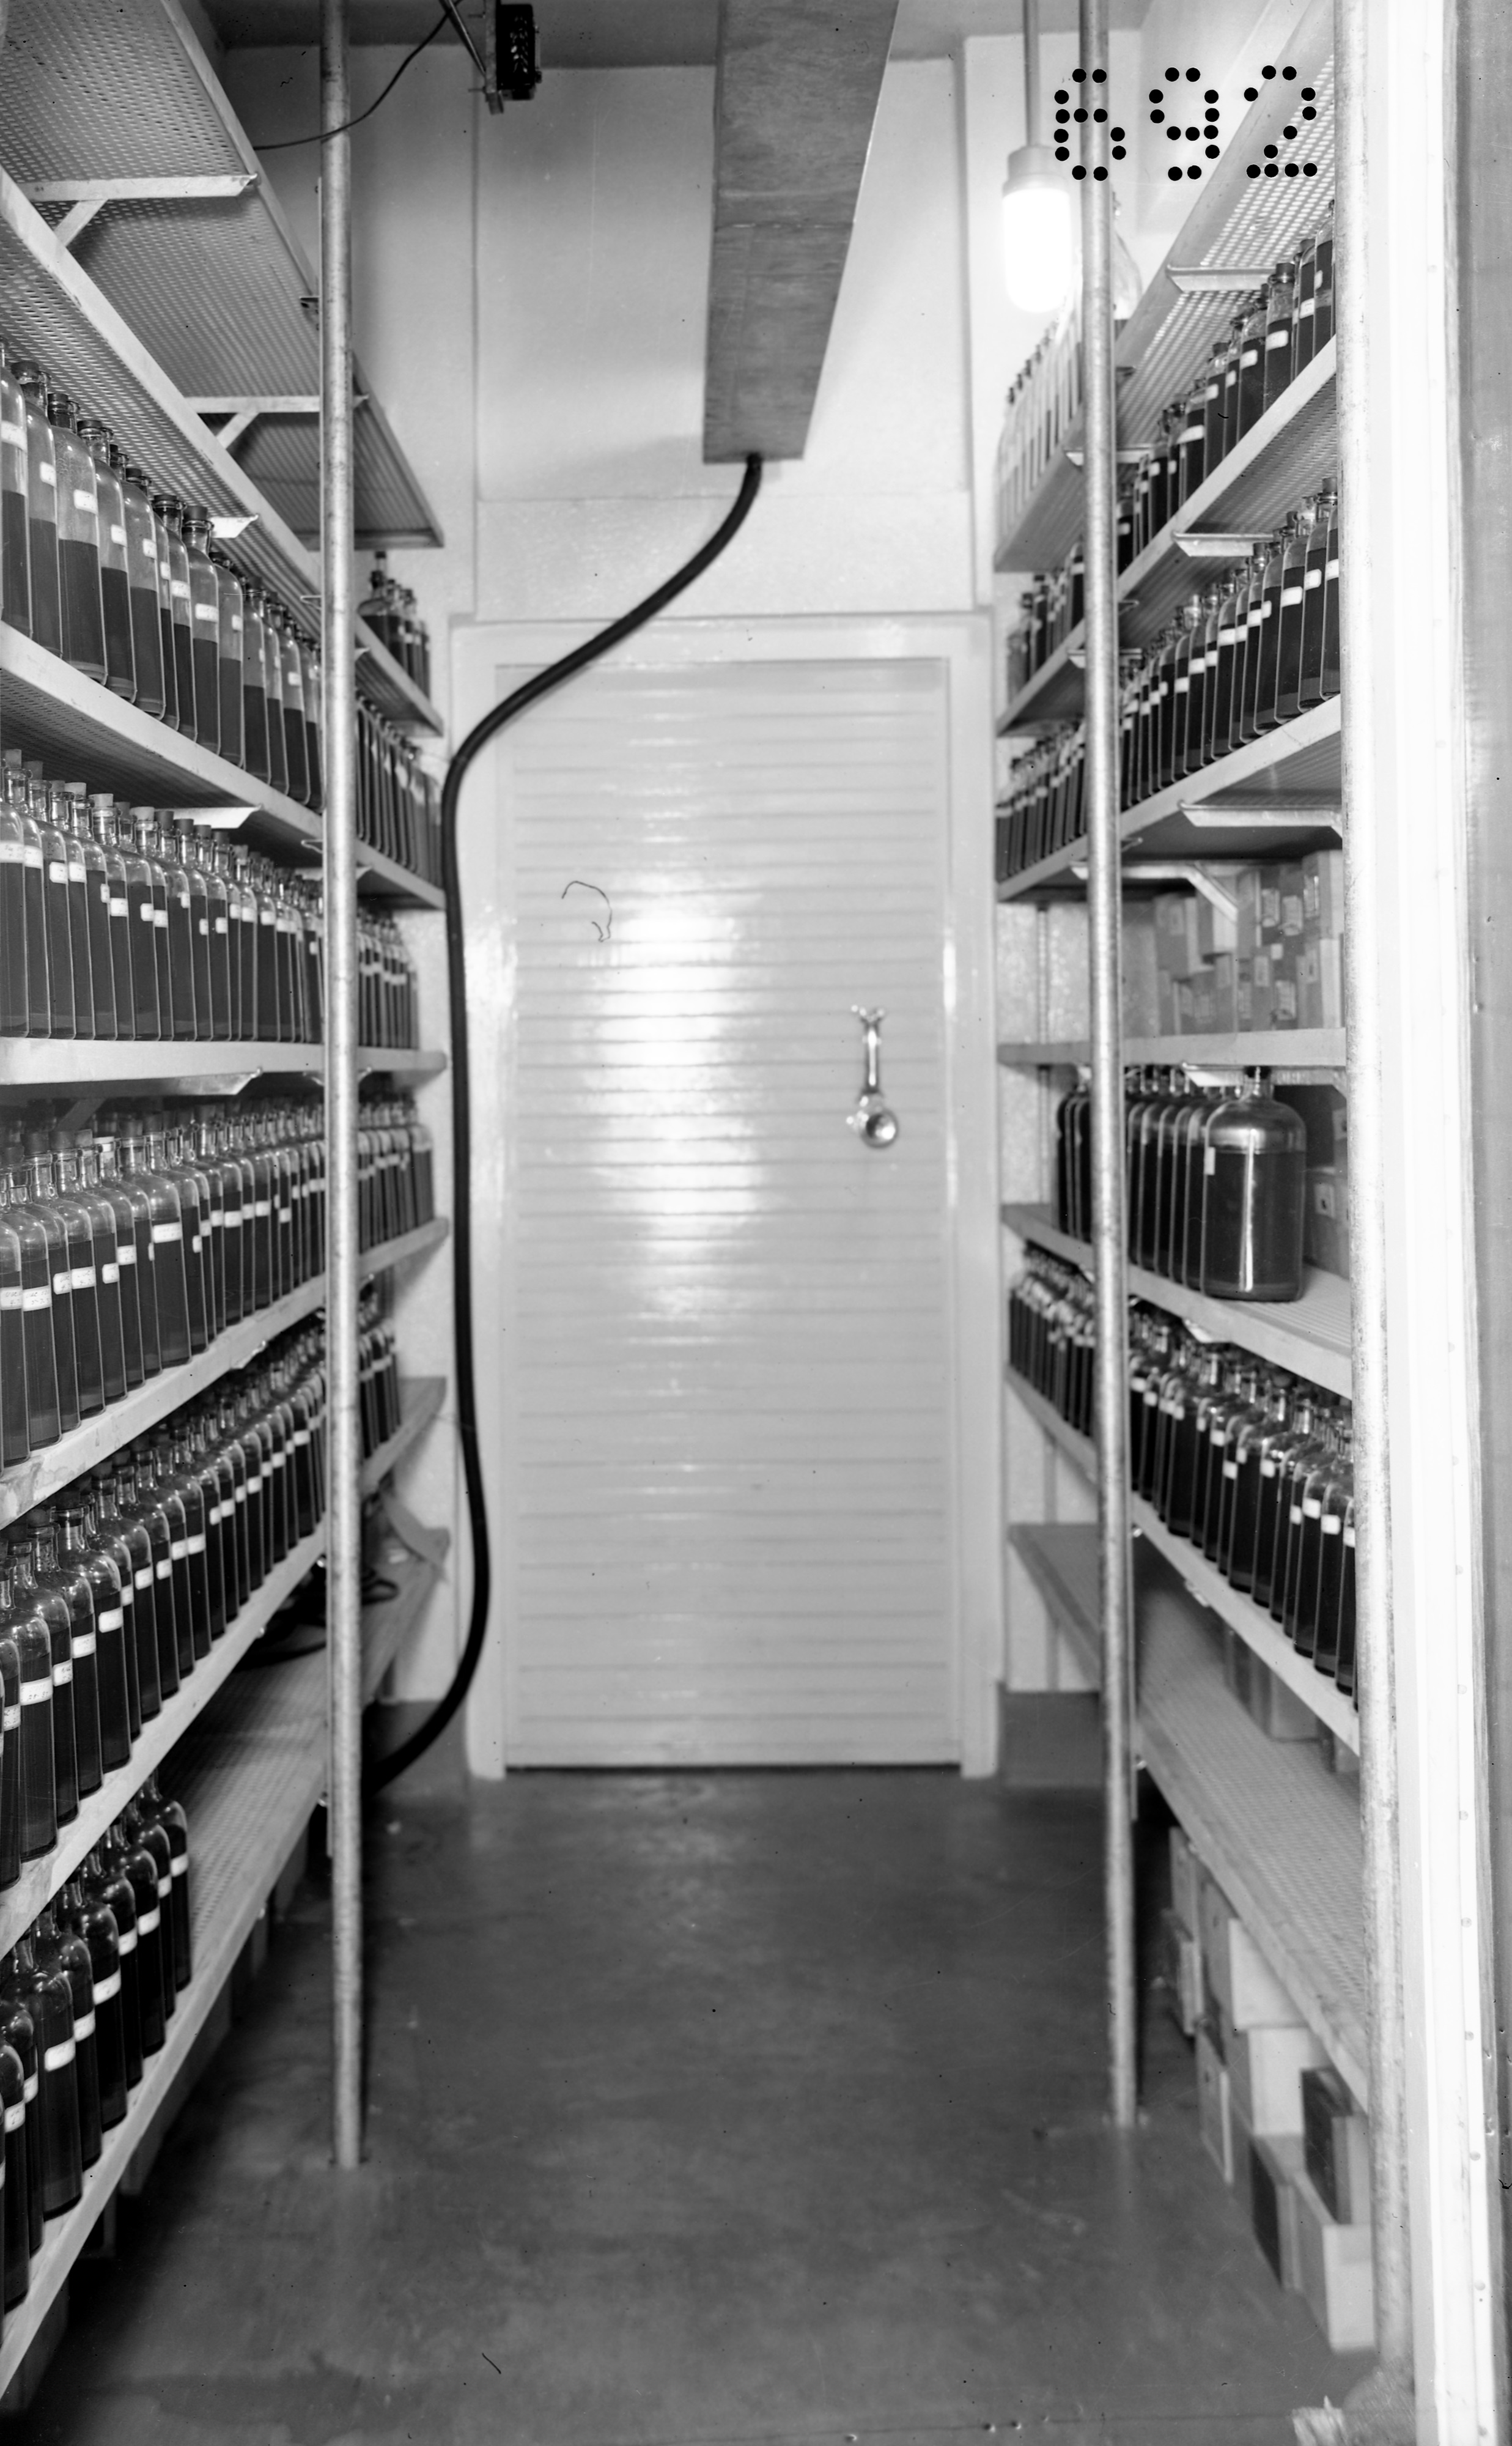 Room lined with metal shelves full of bottles of vaccine